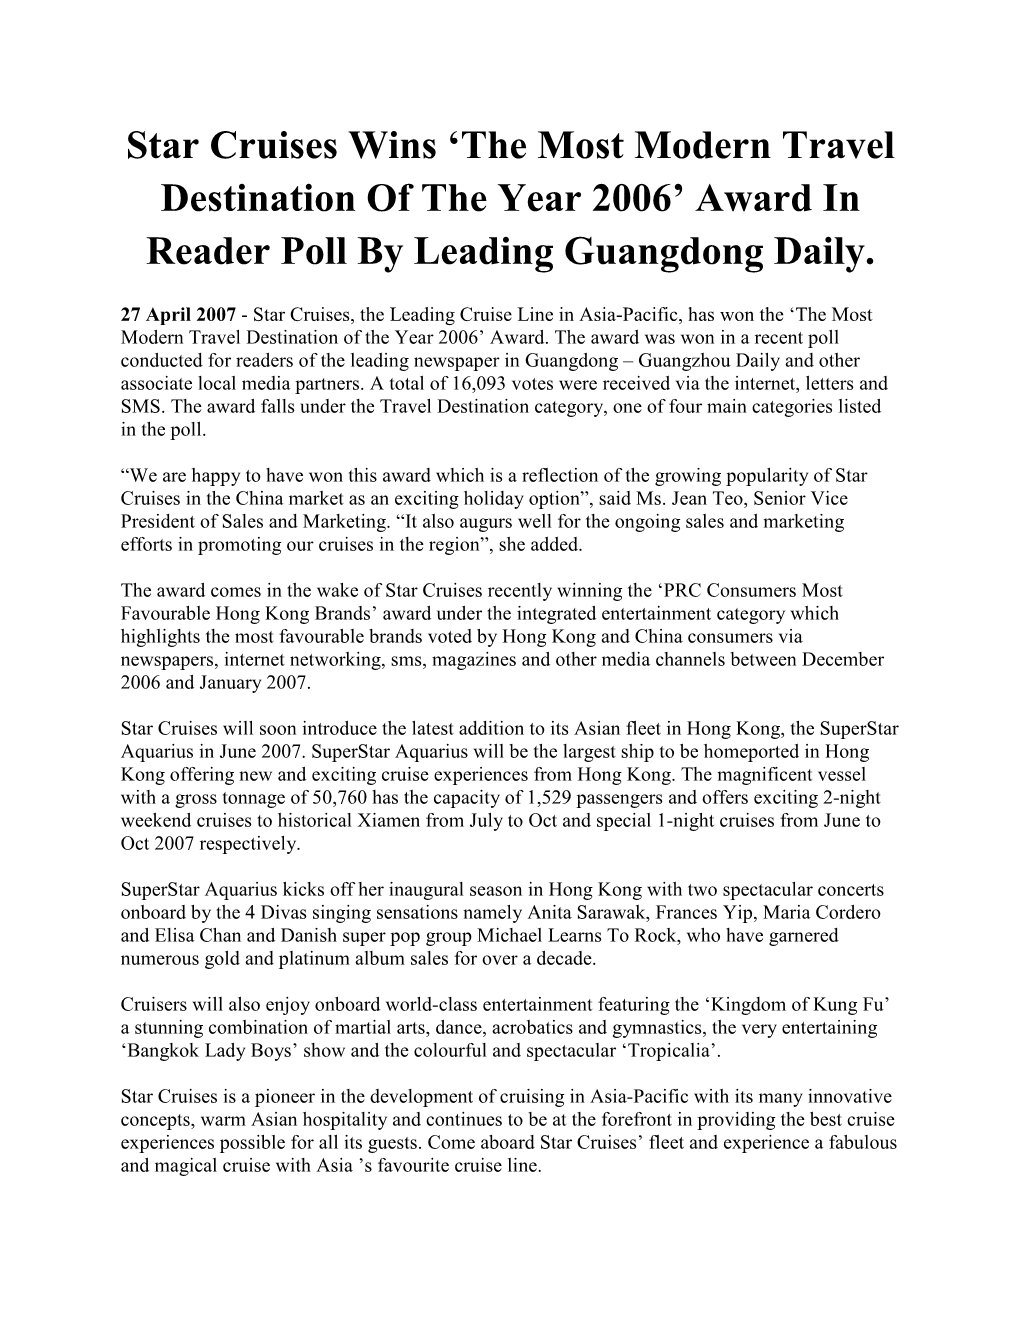 Star Cruises Wins 'The Most Modern Travel Destination of the Year 2006'